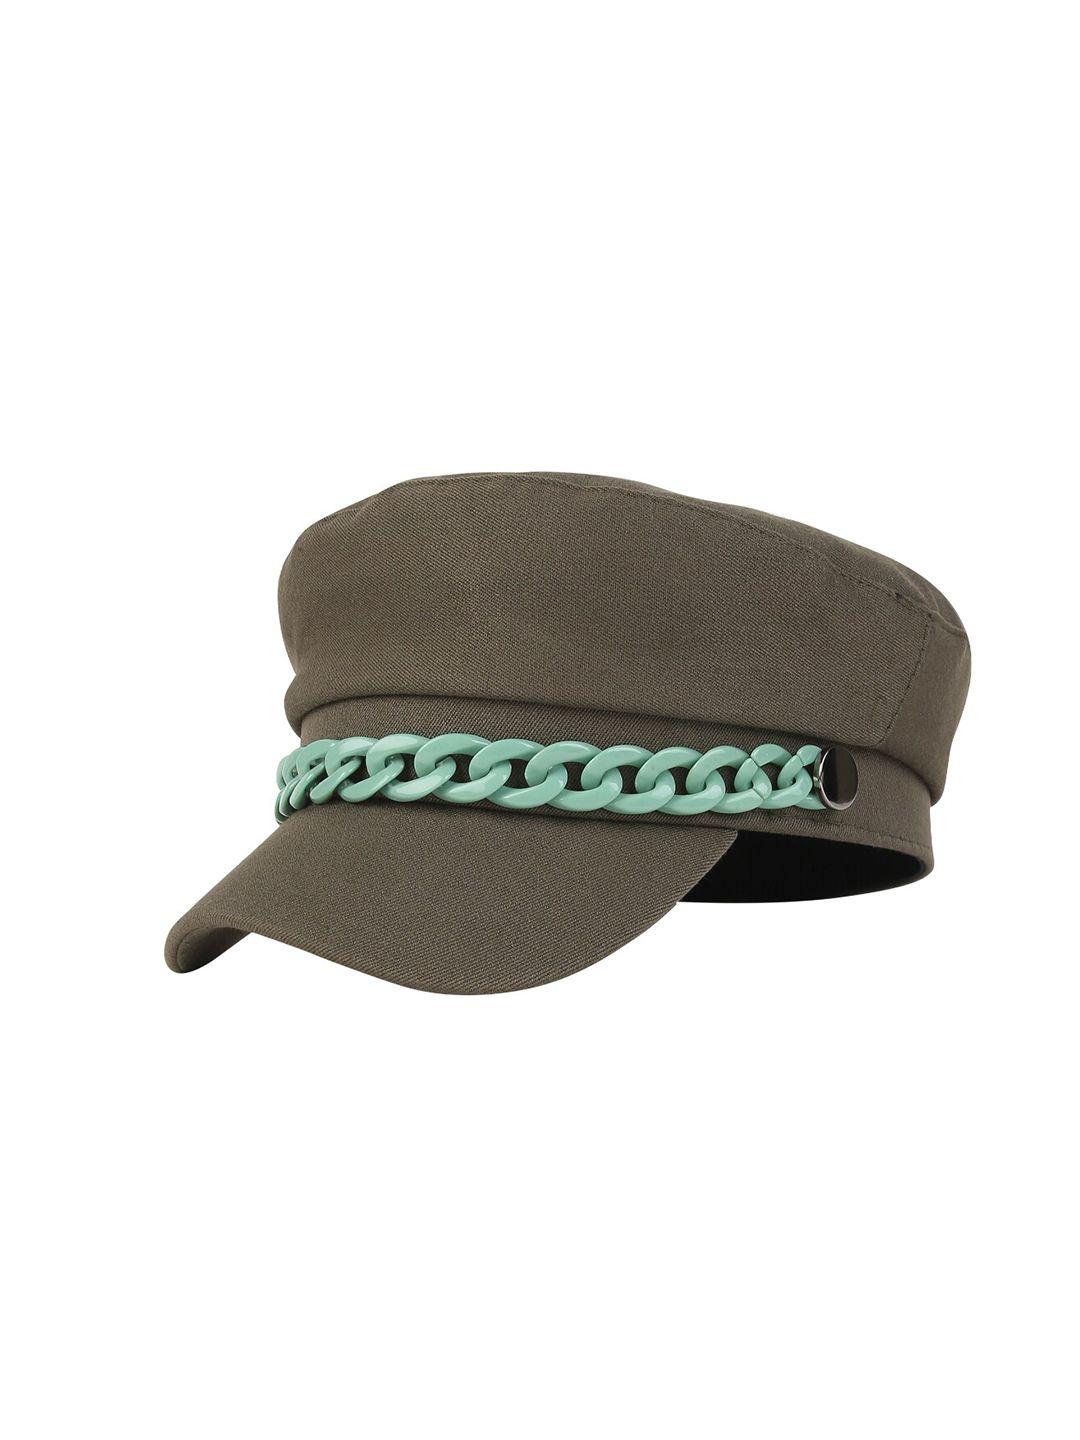 isweven unisex olive green solid cotton ascot cap